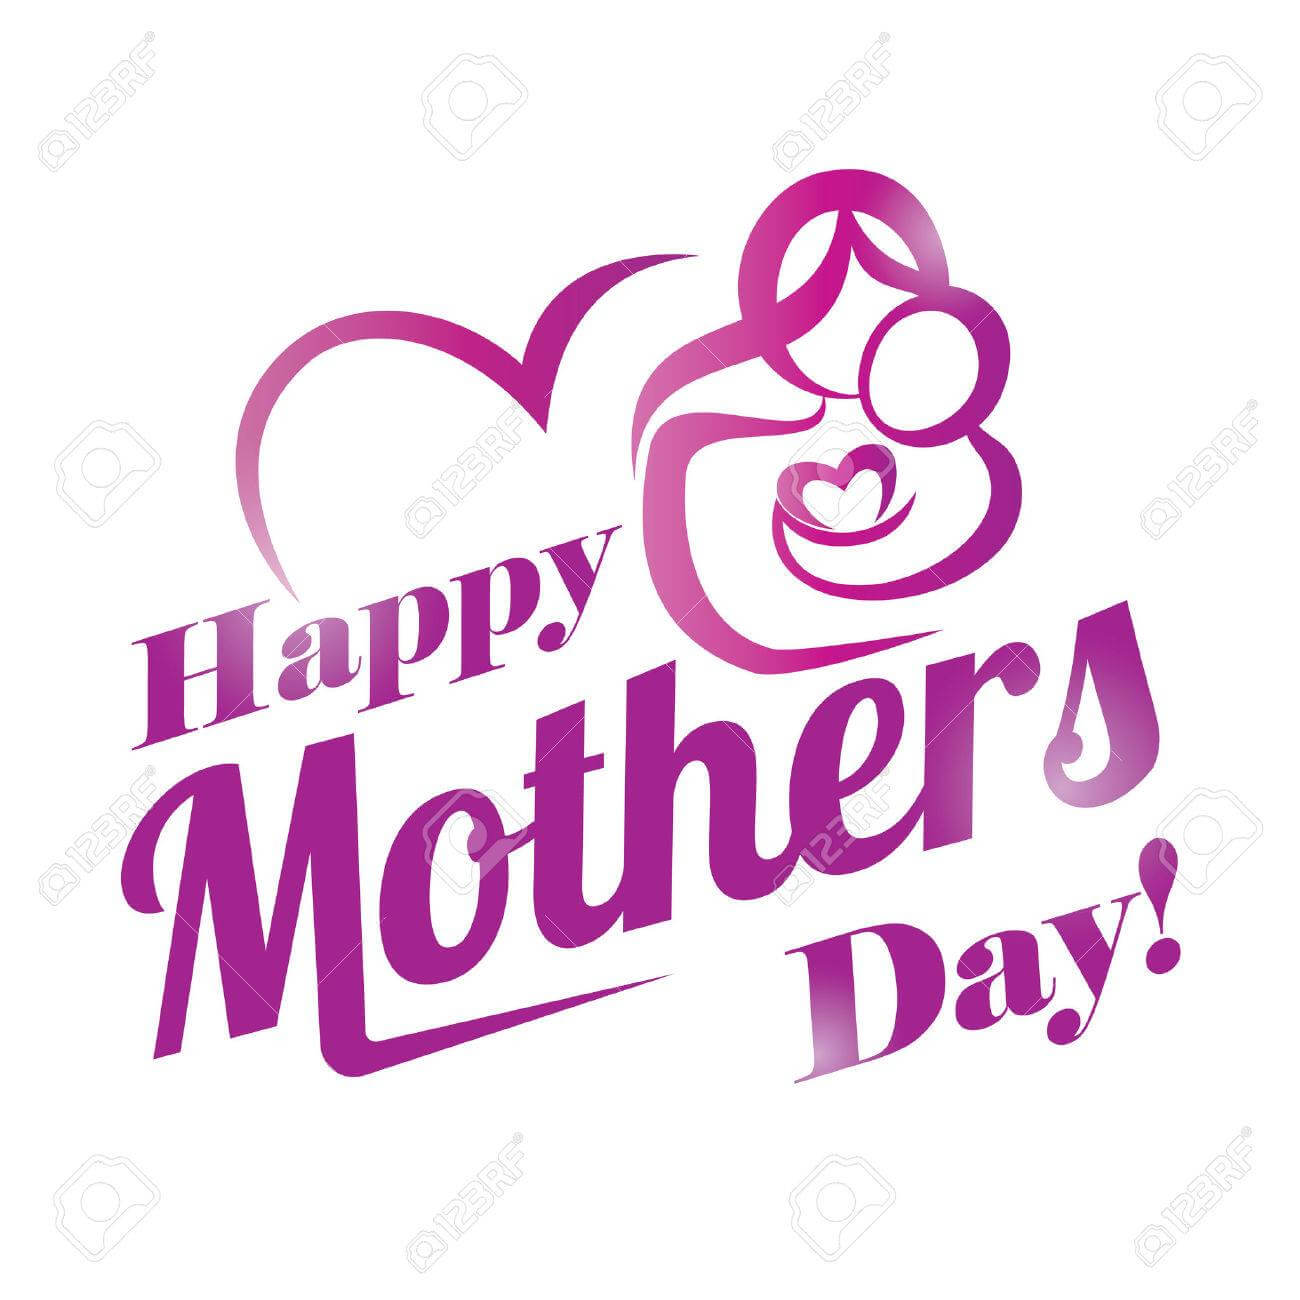 Happy Mothers Day Greeting Card Template, Stylized Symbol Of Mom And Baby Pertaining To Mothers Day Card Templates